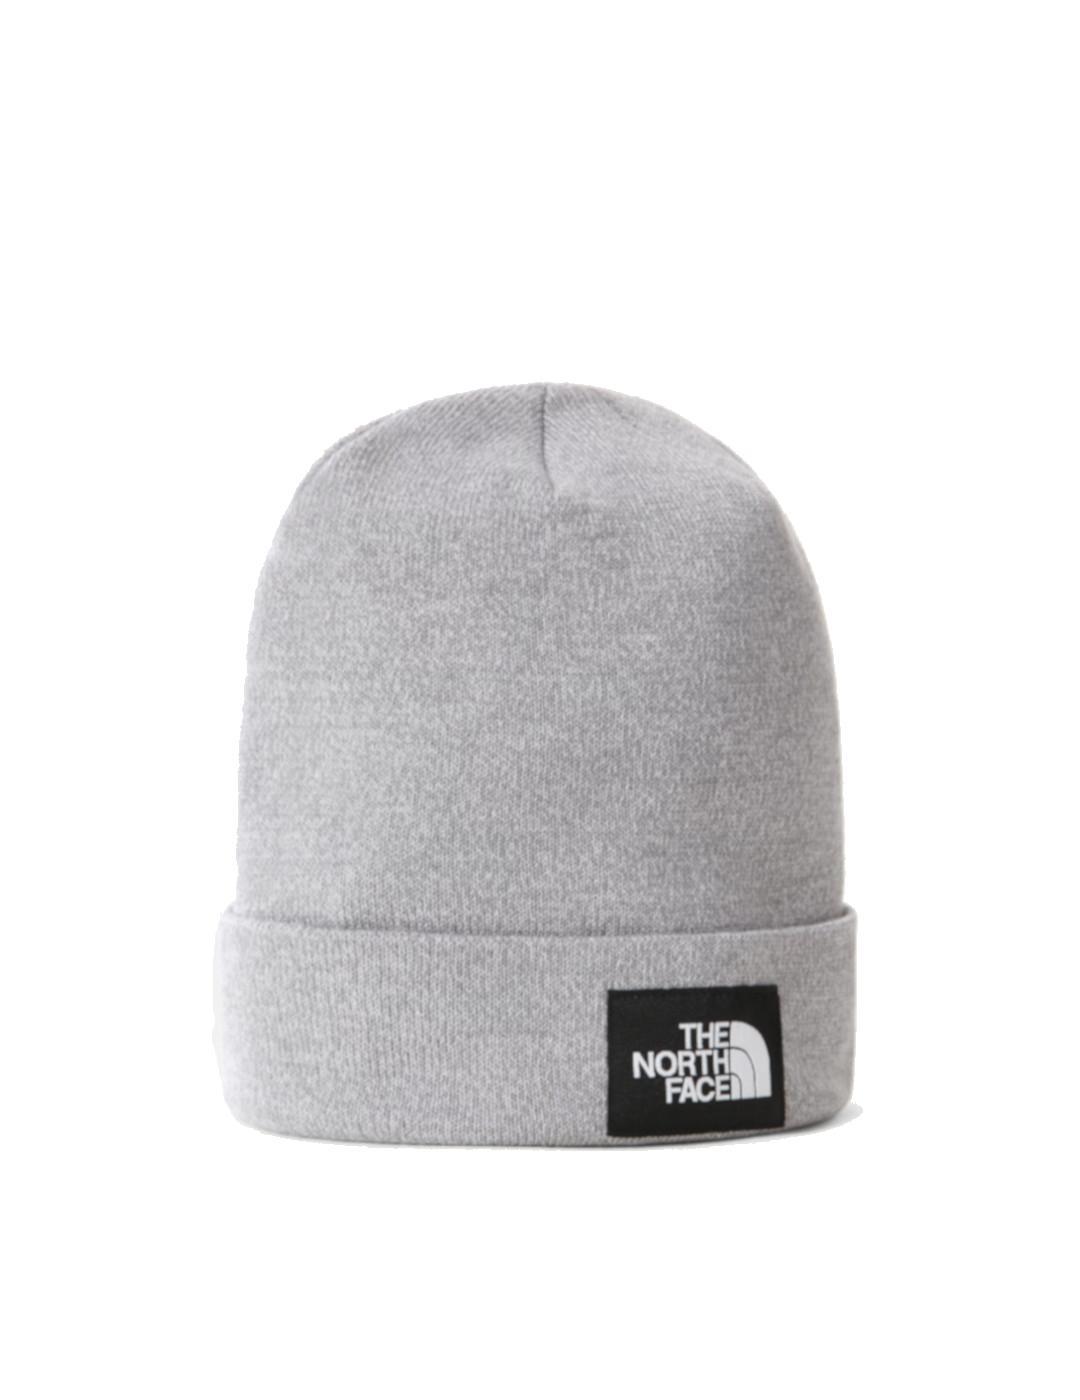 Gorro Unisex The North Face Dock Worker Gris